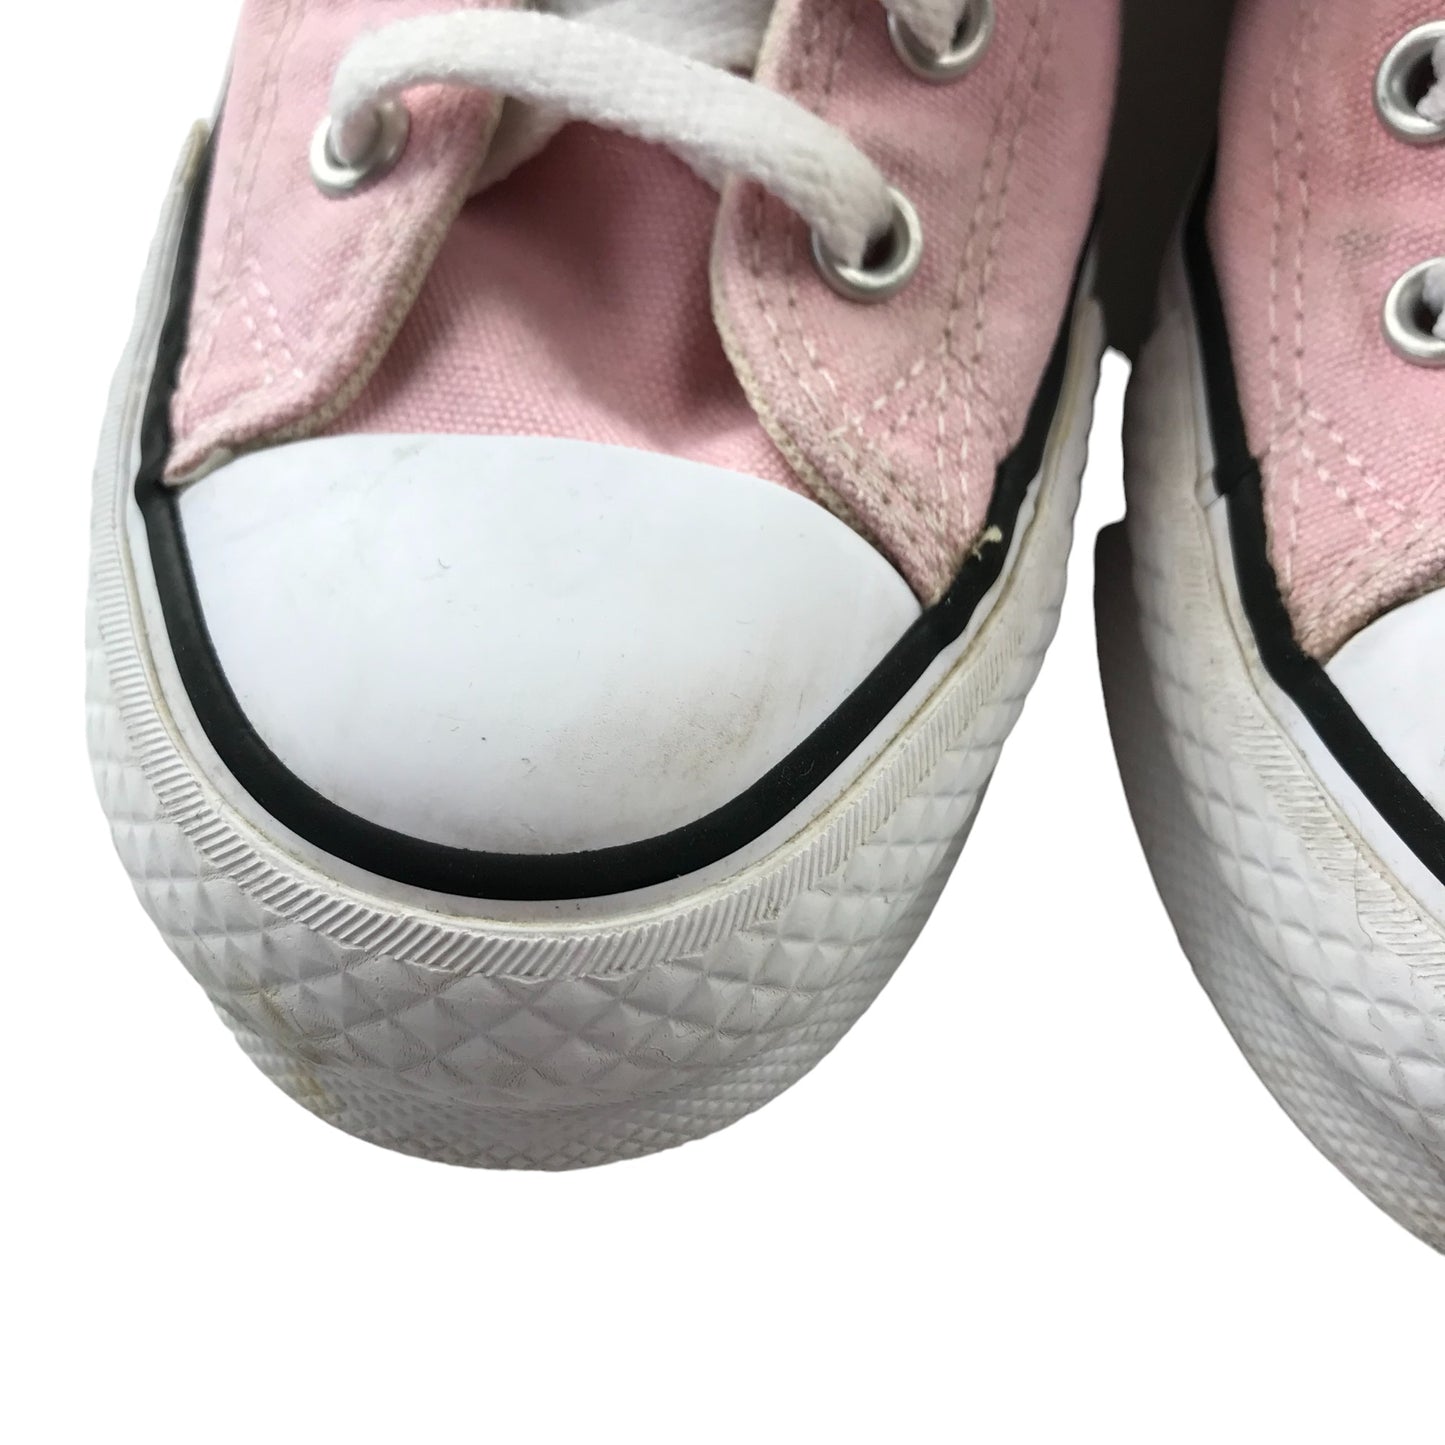 Converse Trainers Shoe Size 3 Light Pink Chunky Heel All Star Chuck Taylor High Tops